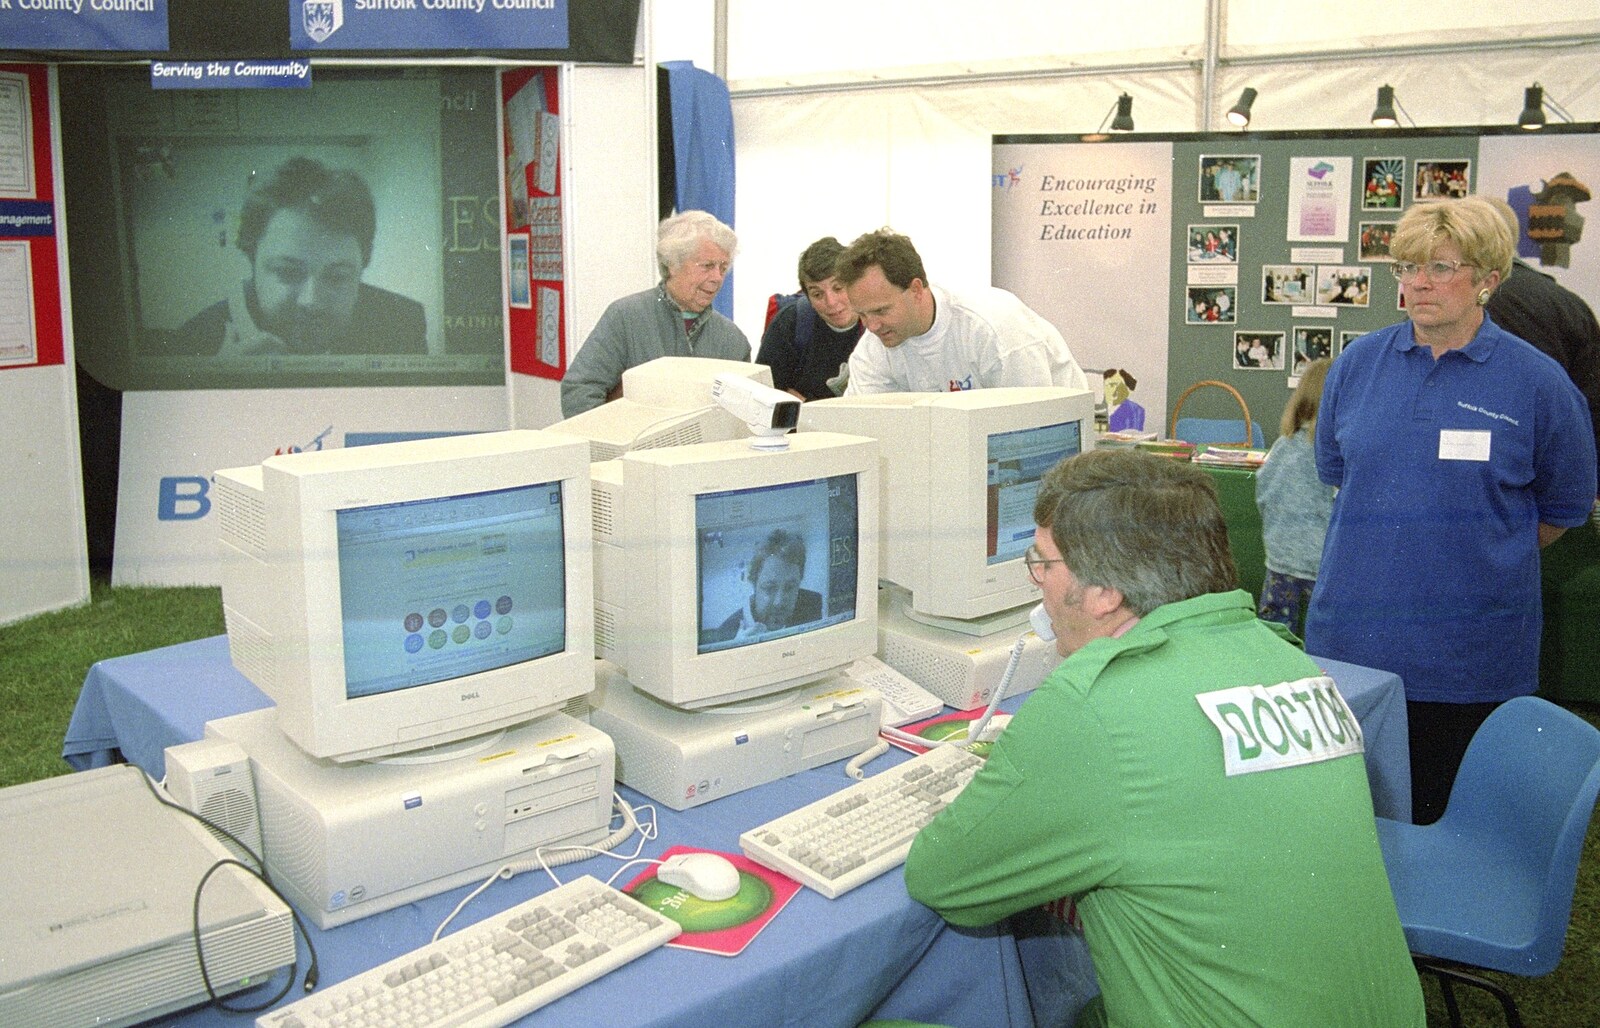 Suffolk County Concill<span class='hilite'>or</span> Chris Mole video-conferences with a Doct<span class='hilite'>or</span> in a tent in a field at the Suffolk Show in 1997. The video is running over a temp<span class='hilite'>or</span>ary ISDN line installed by BT f<span class='hilite'>or</span> the occasion. The system was also used by a deaf group and it enabled them to use sign language with people not in line of sight f<span class='hilite'>or</span> the first time ever.